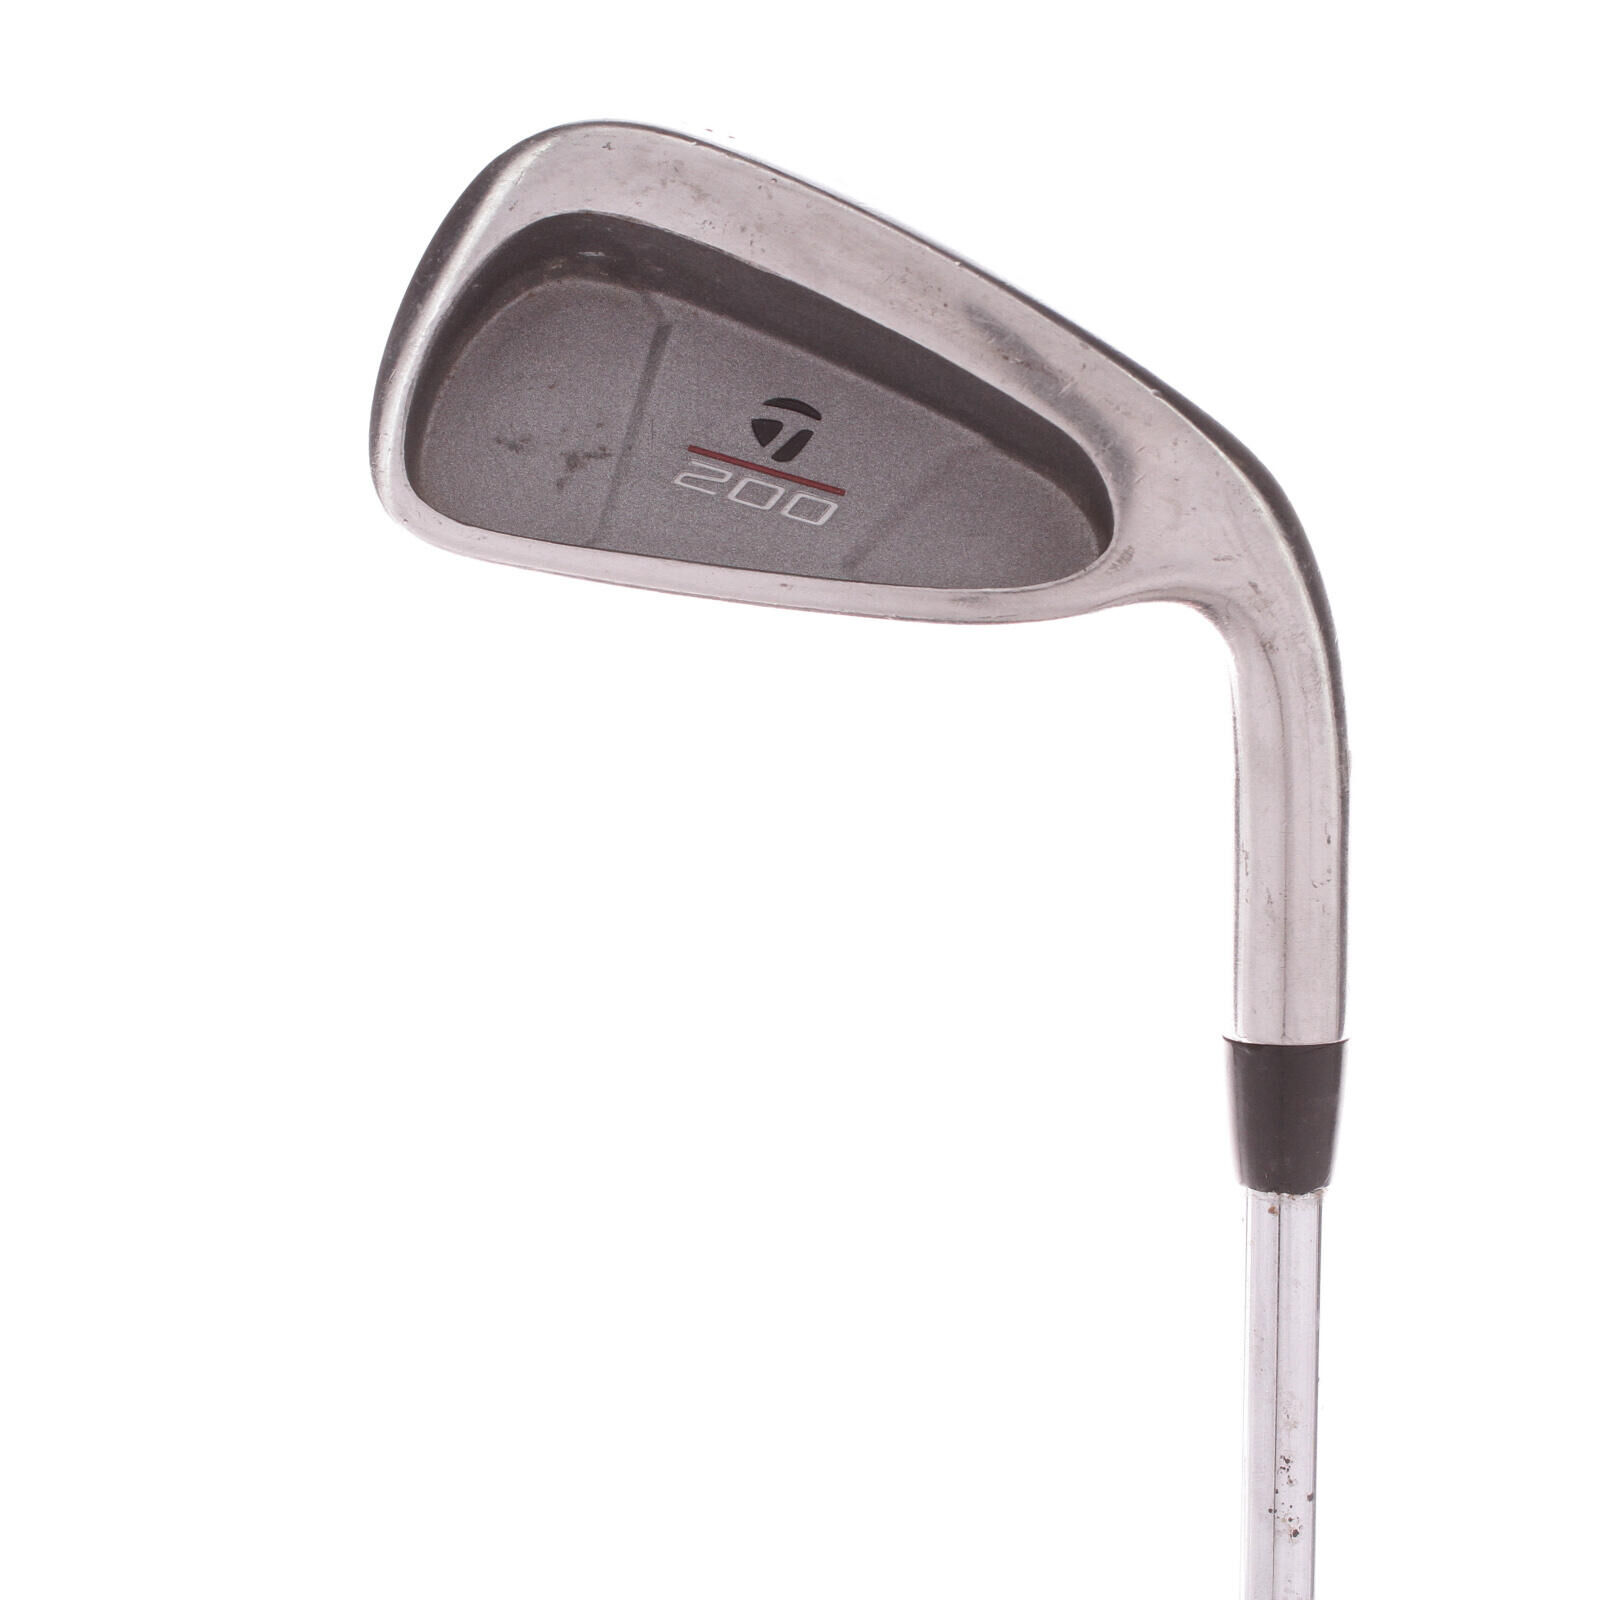 TAYLORMADE USED - 3 Iron TaylorMade 200 Series Steel Regular Shaft Right Handed - GRADE C